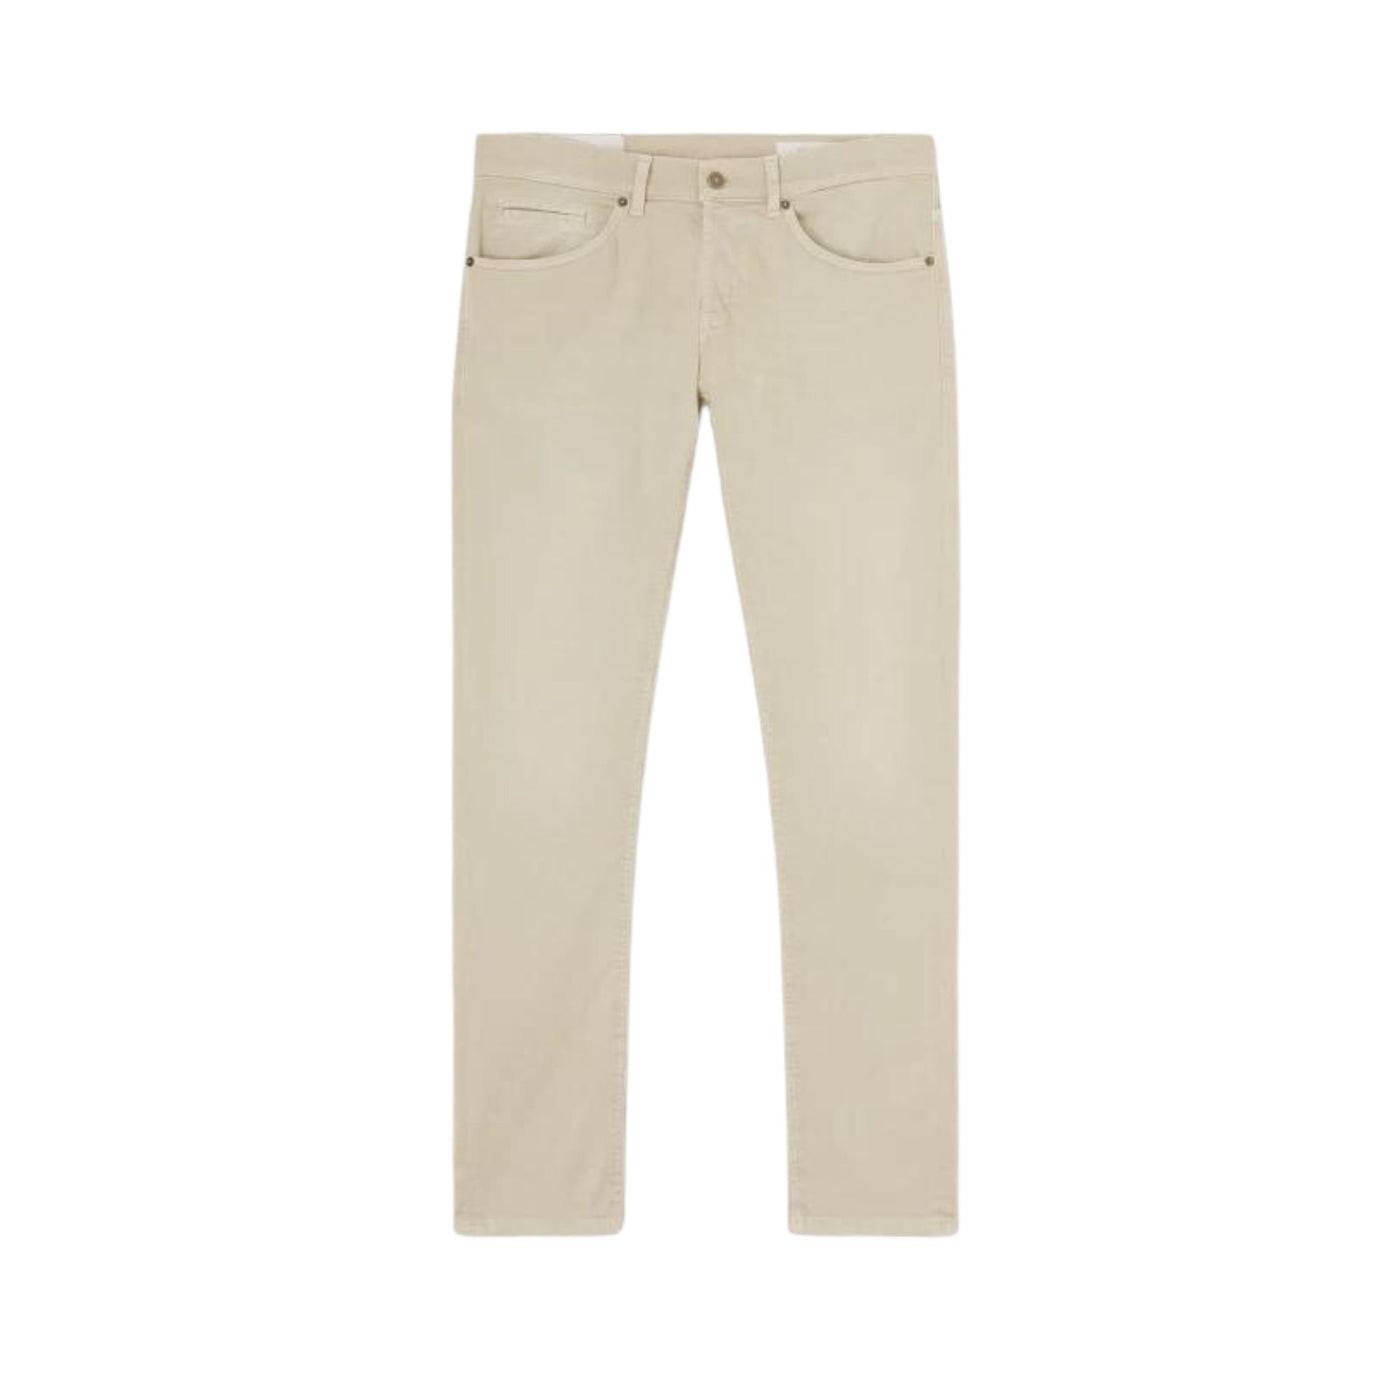 Men's trousers with welt pocket